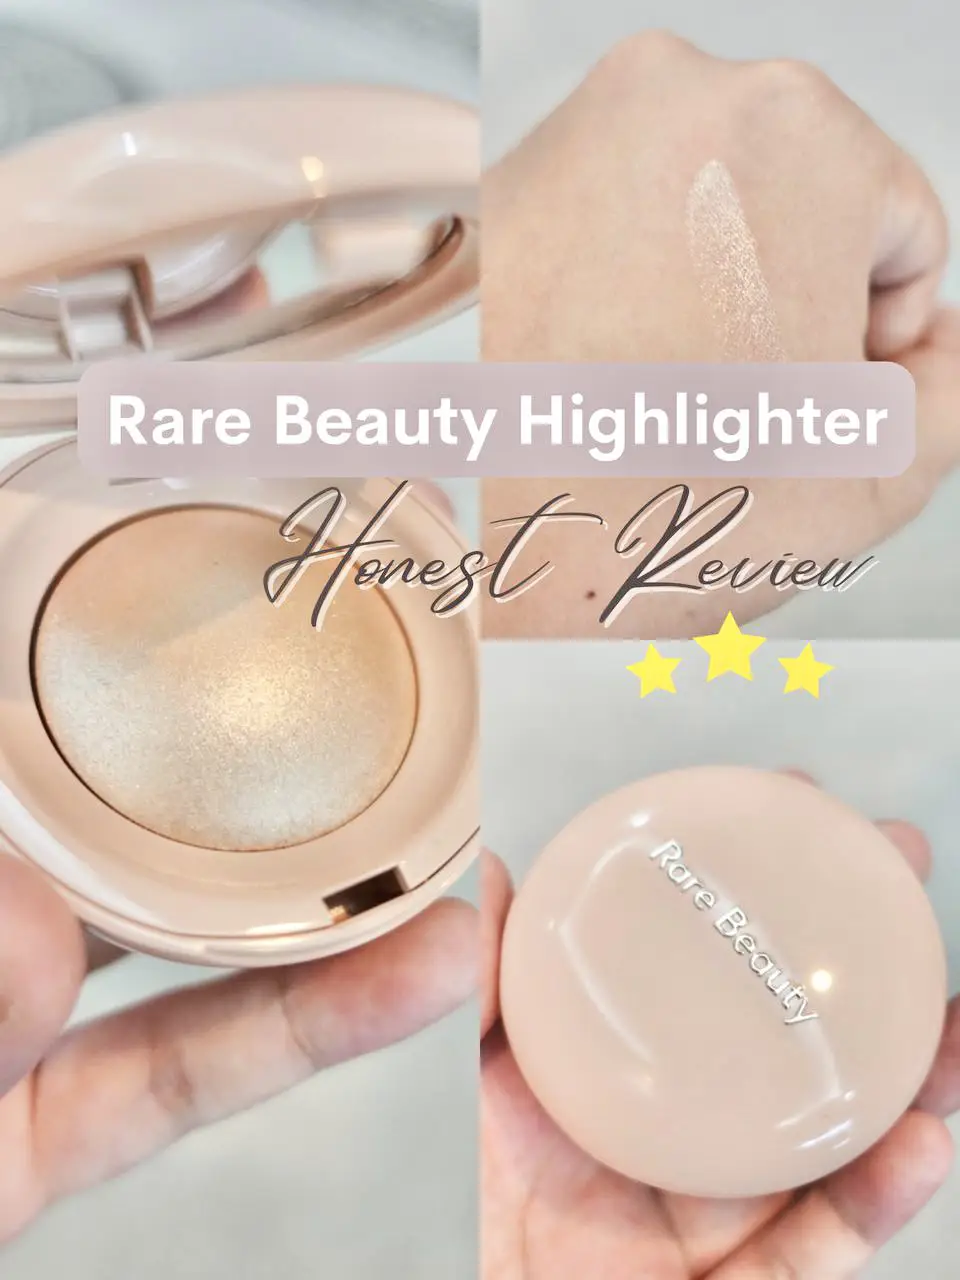 Honest Review on Rare beauty highlighter 😱✨, Gallery posted by Myra D' 🧸